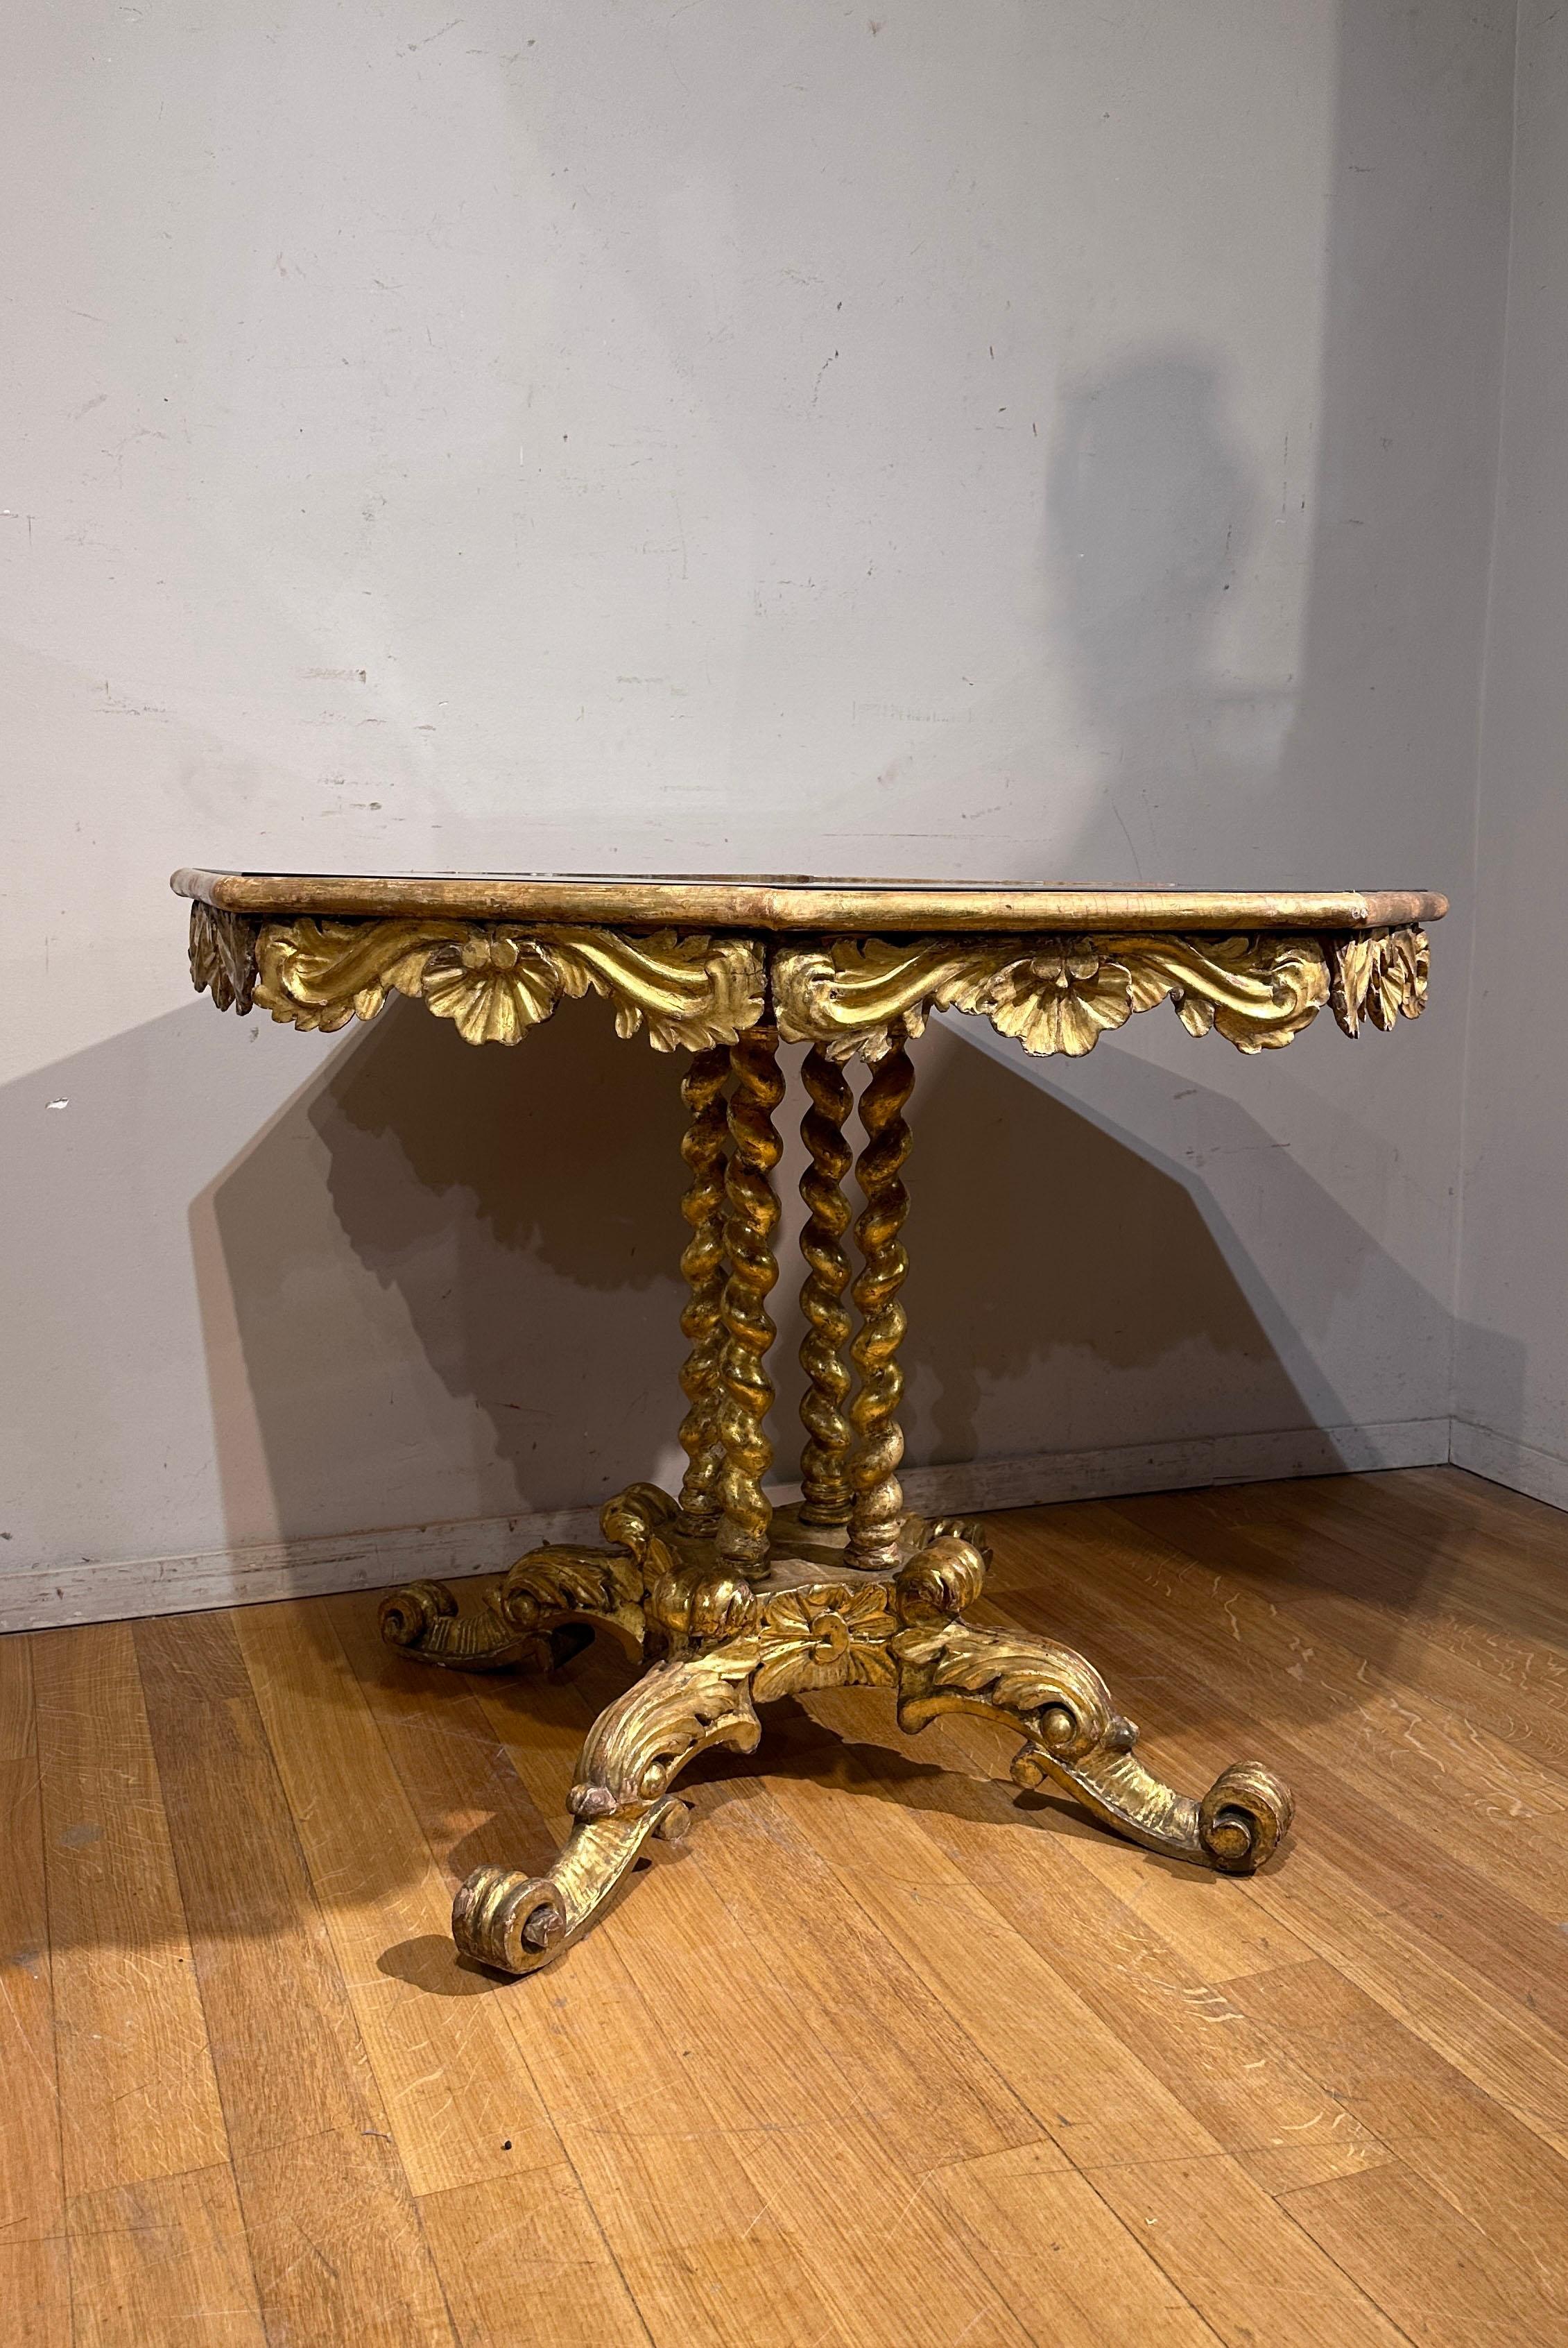 Italian EARLY 19th CENTURY GILDED WOOD TABLE WITH SIMILAR MALACHITE FABRIC For Sale